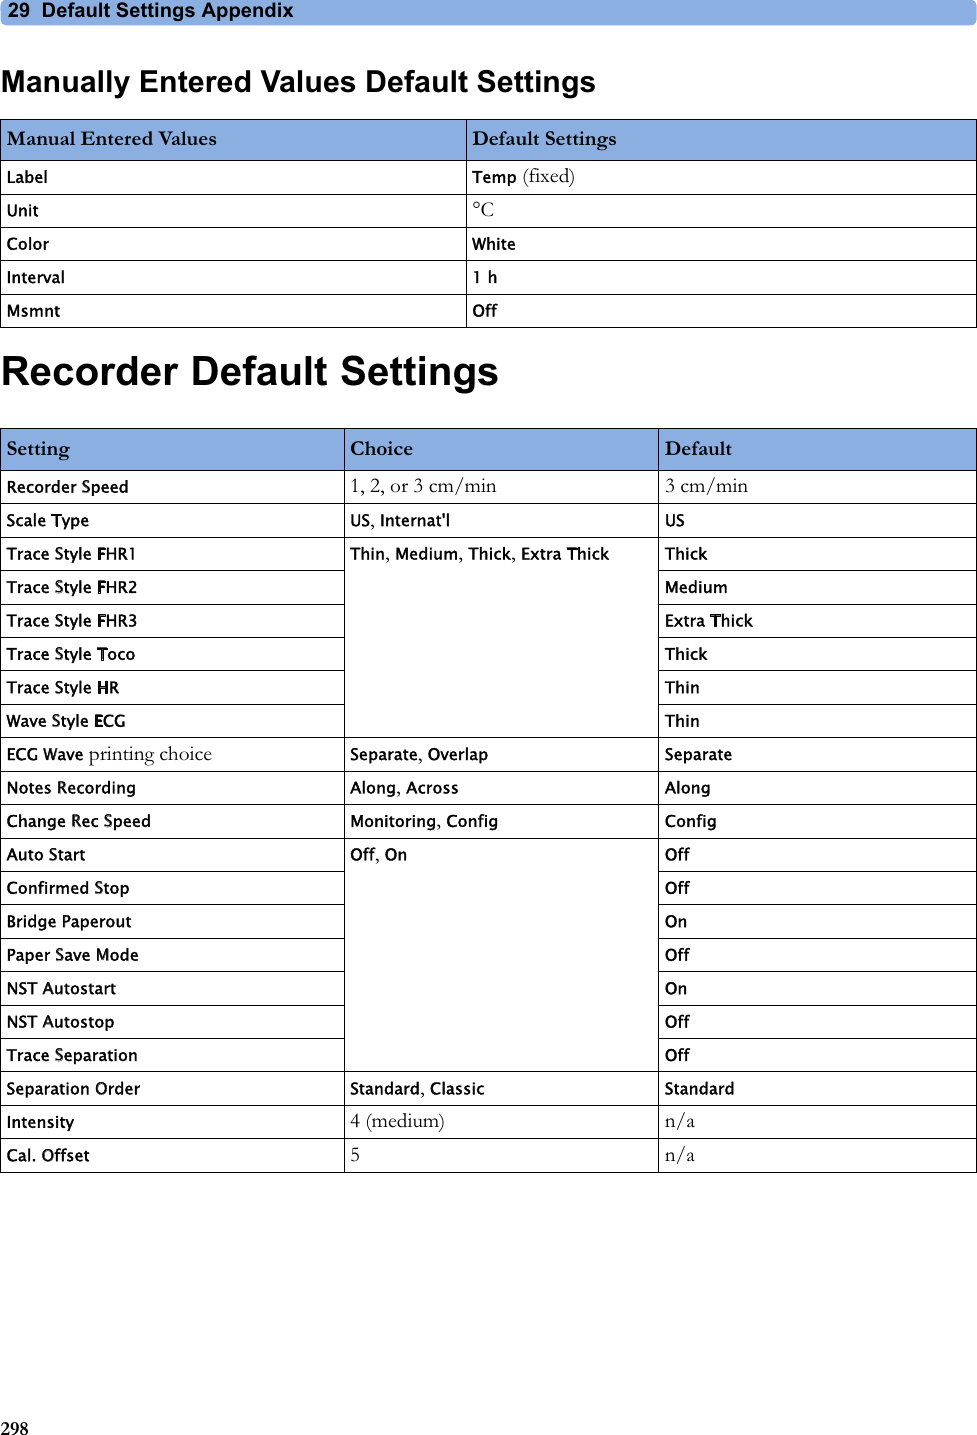 29  Default Settings Appendix298Manually Entered Values Default SettingsRecorder Default SettingsManual Entered Values Default SettingsLabel Temp (fixed)Unit °CColor WhiteInterval 1 hMsmnt OffSetting Choice DefaultRecorder Speed 1, 2, or 3 cm/min 3 cm/minScale Type US, Internat&apos;l USTrace Style FHR1 Thin, Medium, Thick, Extra Thick ThickTrace Style FHR2 MediumTrace Style FHR3 Extra ThickTrace Style Toco ThickTrace Style HR ThinWave Style ECG ThinECG Wave printing choice Separate, Overlap SeparateNotes Recording Along, Across AlongChange Rec Speed Monitoring, Config ConfigAuto Start Off, On OffConfirmed Stop OffBridge Paperout OnPaper Save Mode OffNST Autostart OnNST Autostop OffTrace Separation OffSeparation Order Standard, Classic StandardIntensity 4 (medium) n/aCal. Offset 5  n/a